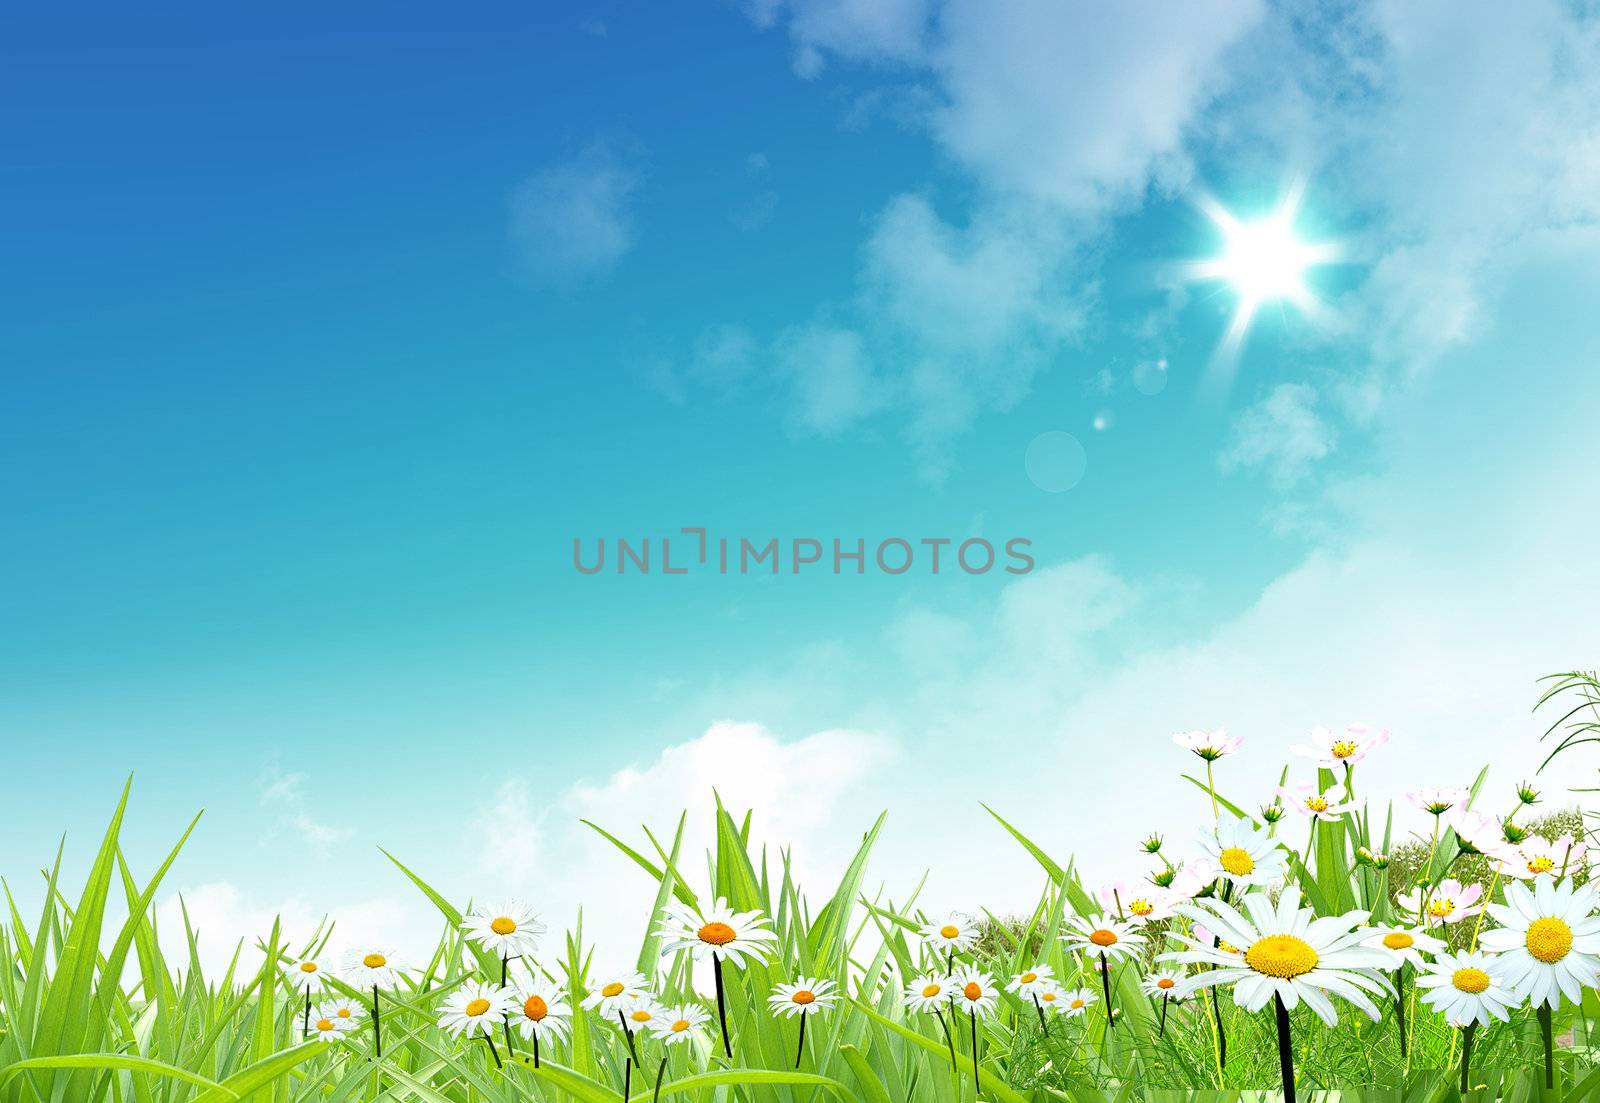 Nice field of camomiles on the blue bright sky background 